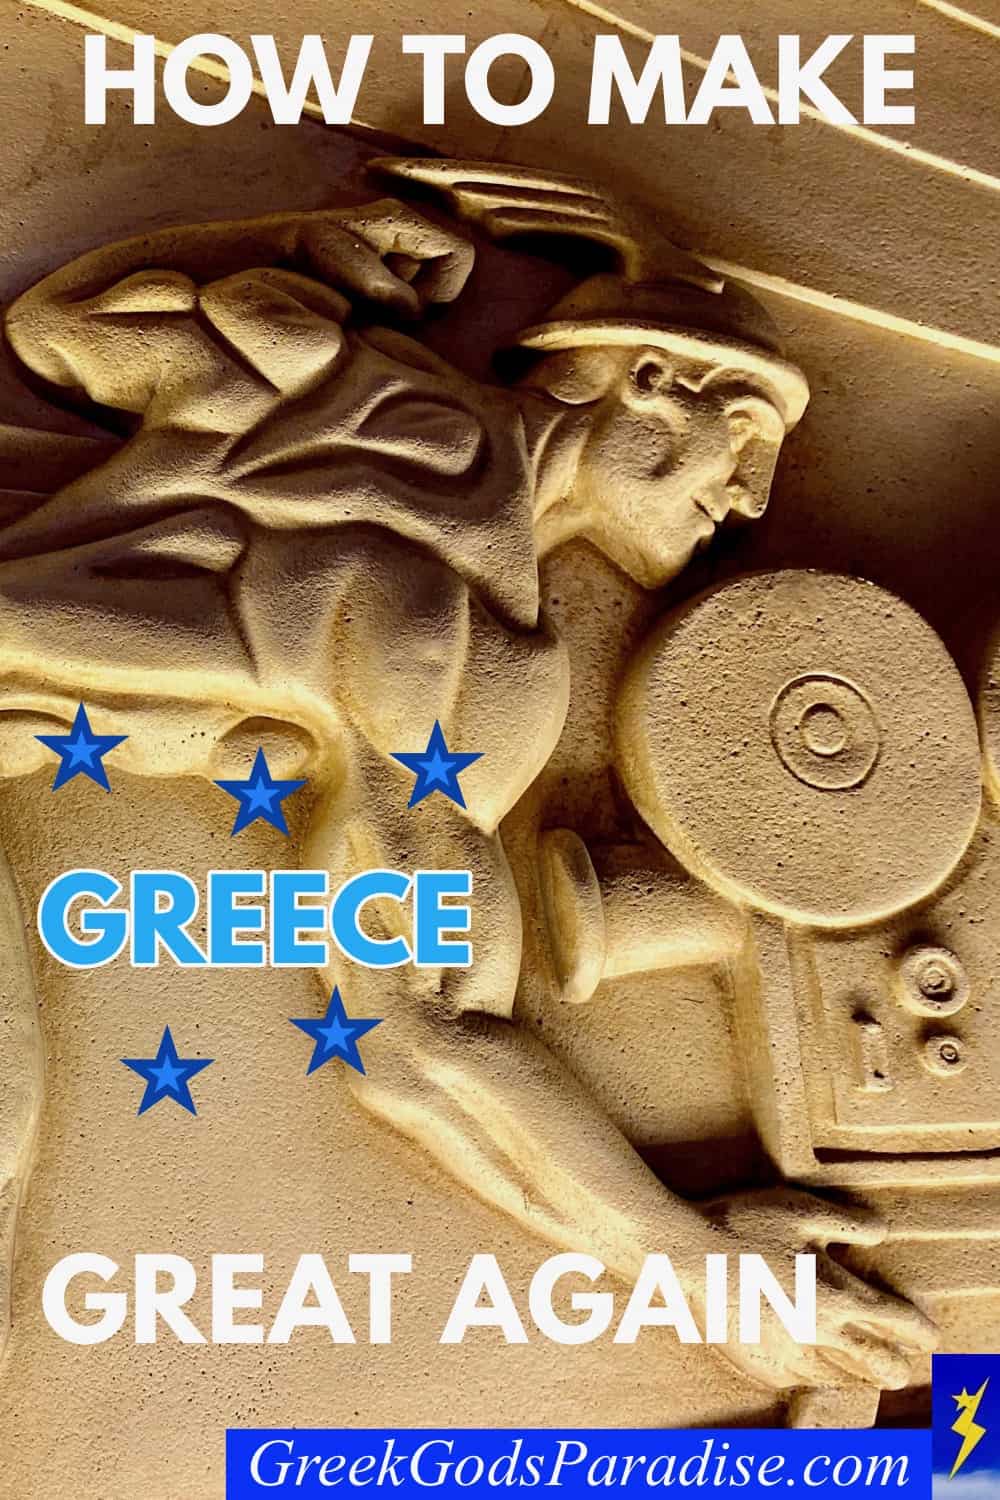 The Way to make Greece Great Again